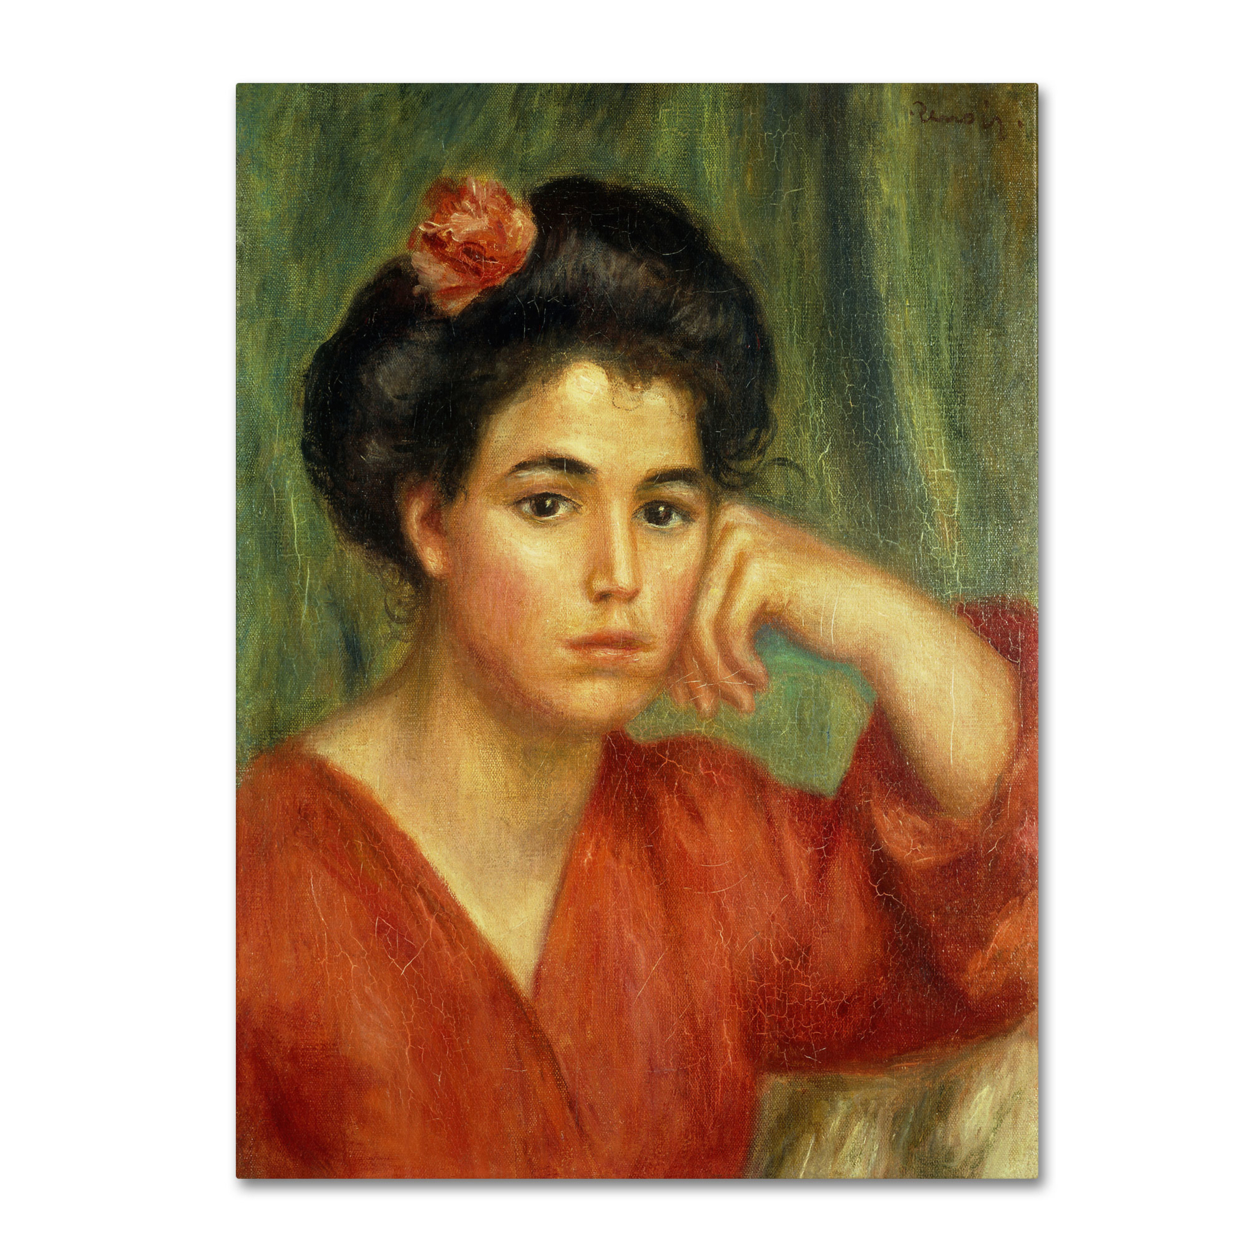 Pierre Renoir 'Young Woman With A Rose 1907' Canvas Wall Art 35 X 47 Inches